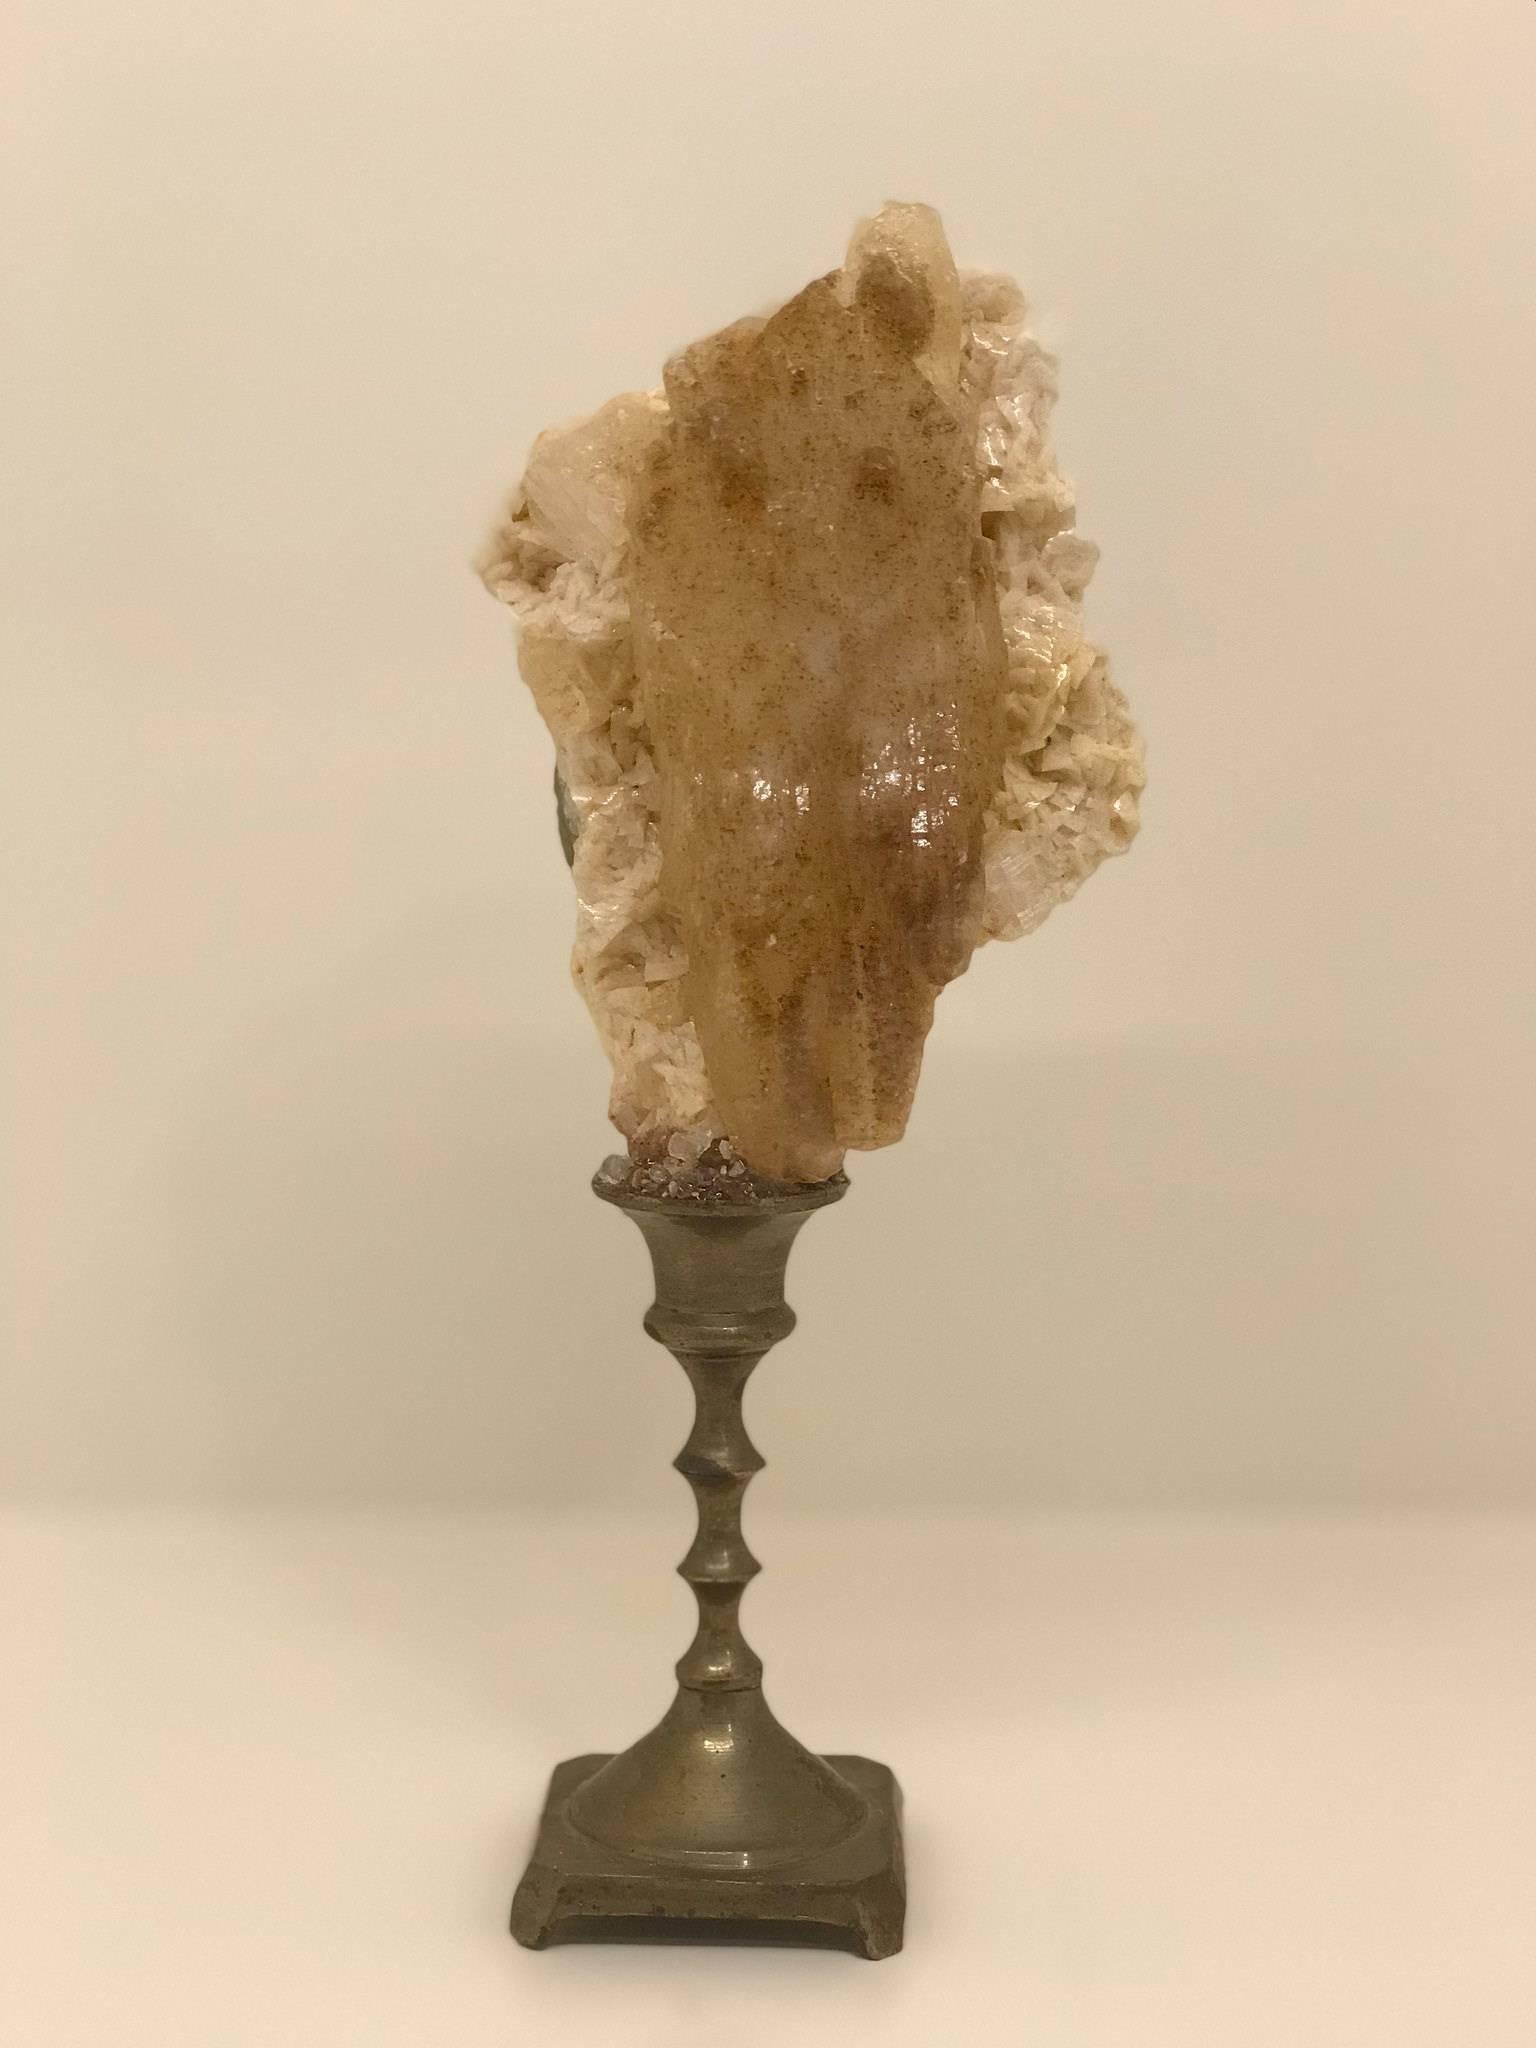 Contemporary Natural Mineral Specimen Collection